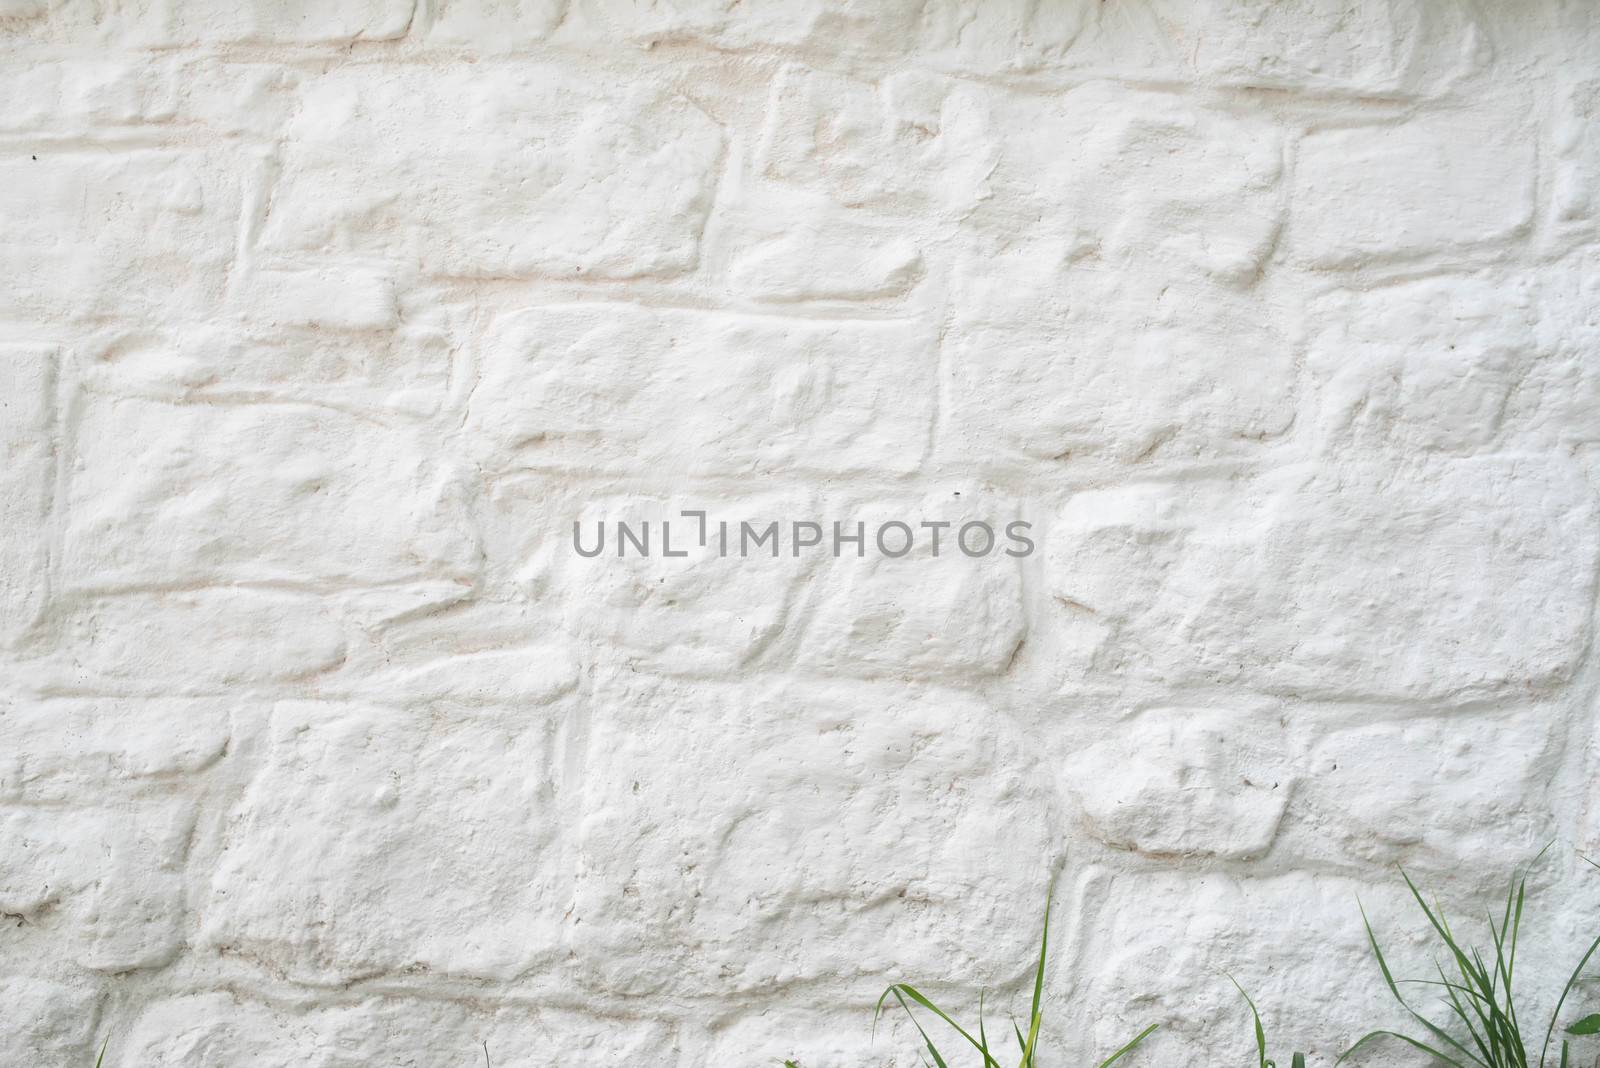 Detail and texture of whitewashed stone all. Ancient construction is sturdy and strong. Natural light with copy space